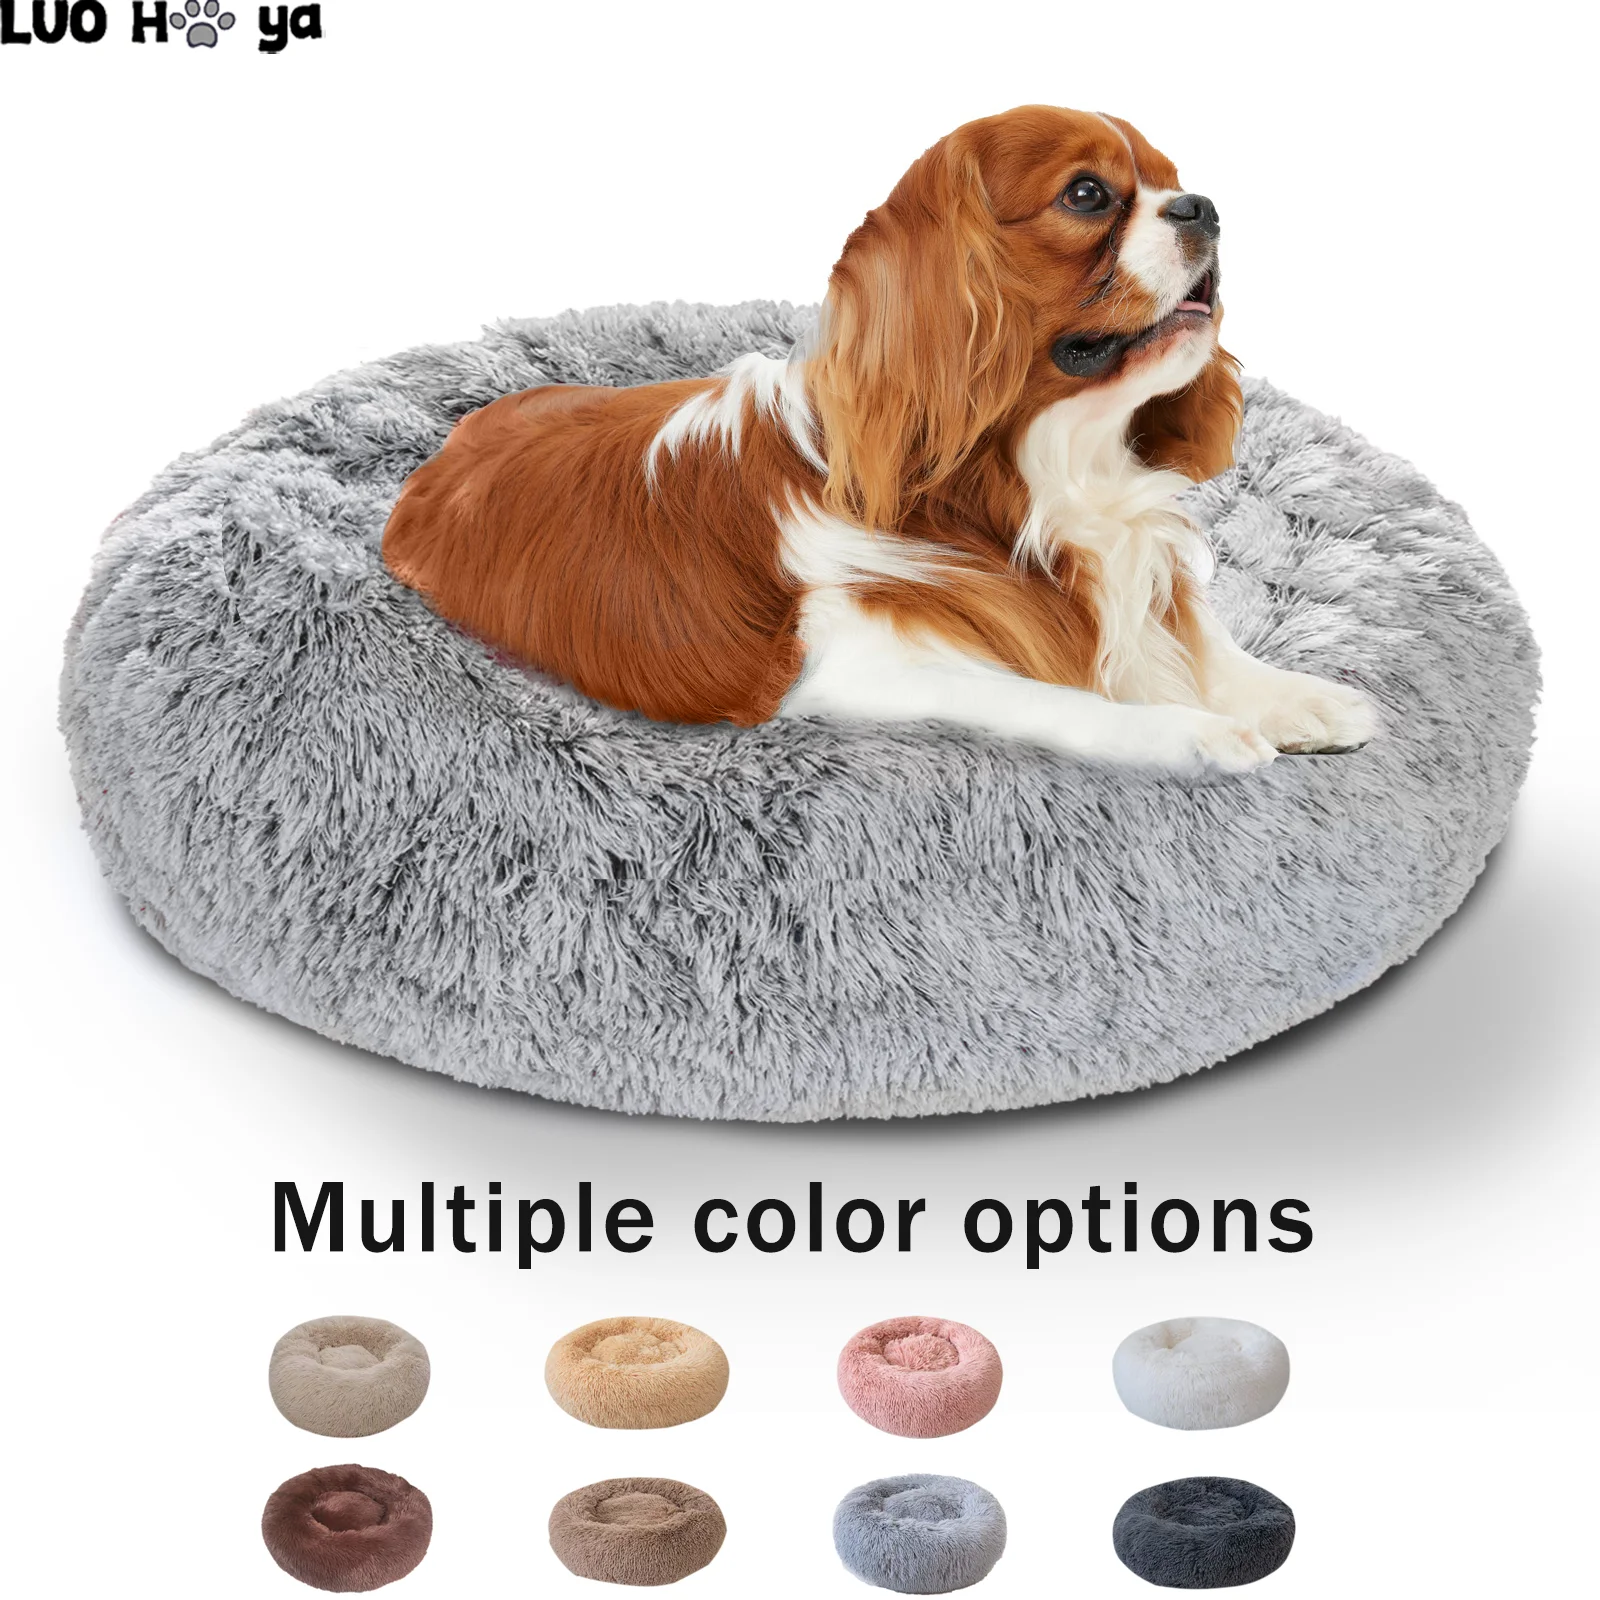 

Pet Beds Sofa Cover Small Medium Large Dogs Pet Kennel Round Cushion Bed for Dog Cat Puppy Pets Accessories for All Sizes Pet